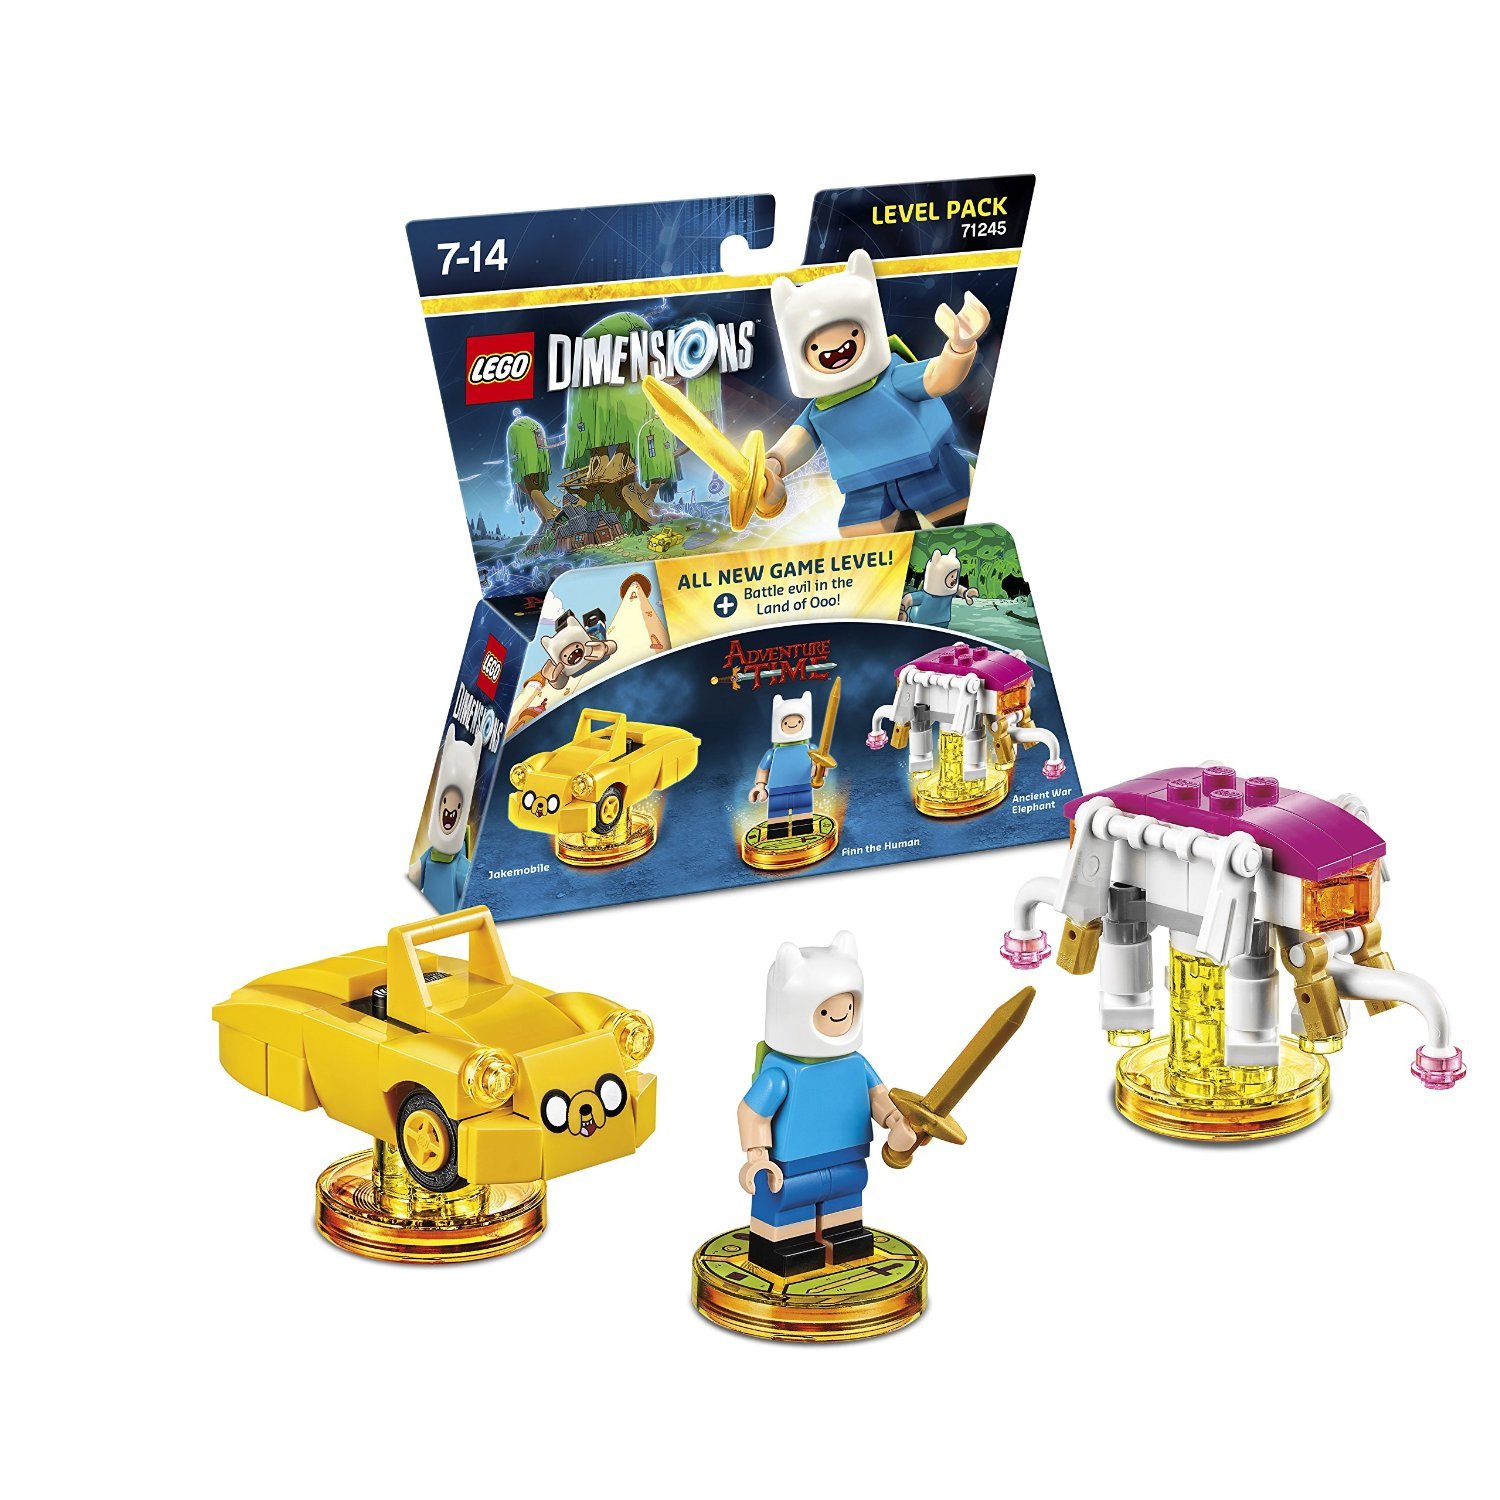 LEGO Dimensions - Level Pack (71245) - Adventure Time (Fin the Human, Ancient War Elephant, Jackmobile)